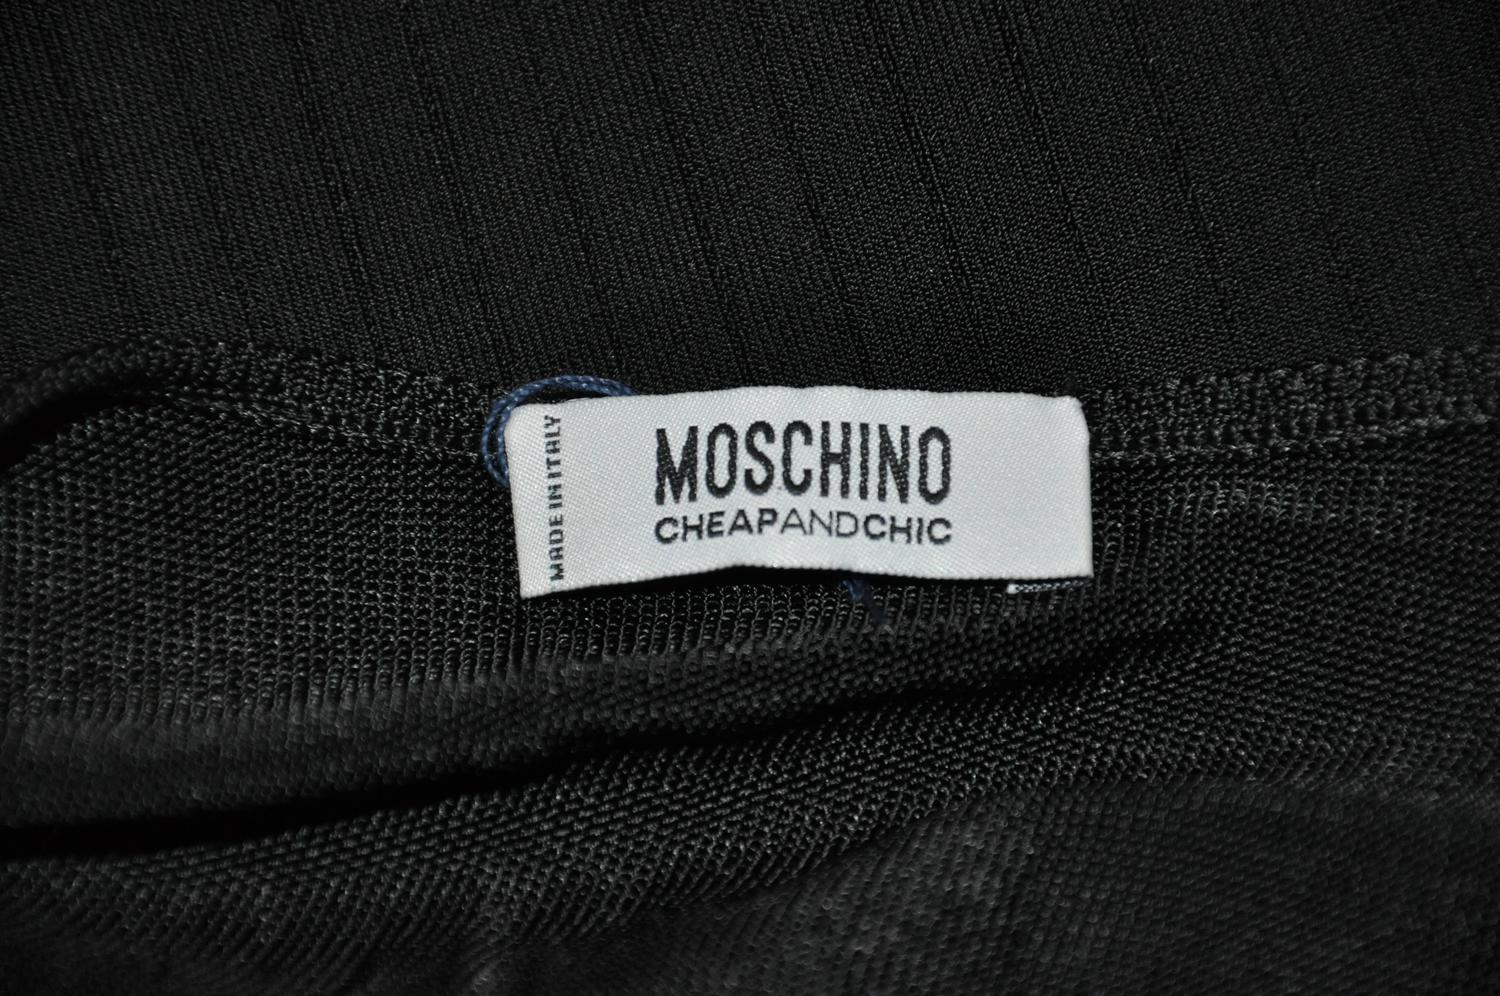 Moschino Black Body-Hugging Stretch Knit Tank Top For Sale at 1stdibs